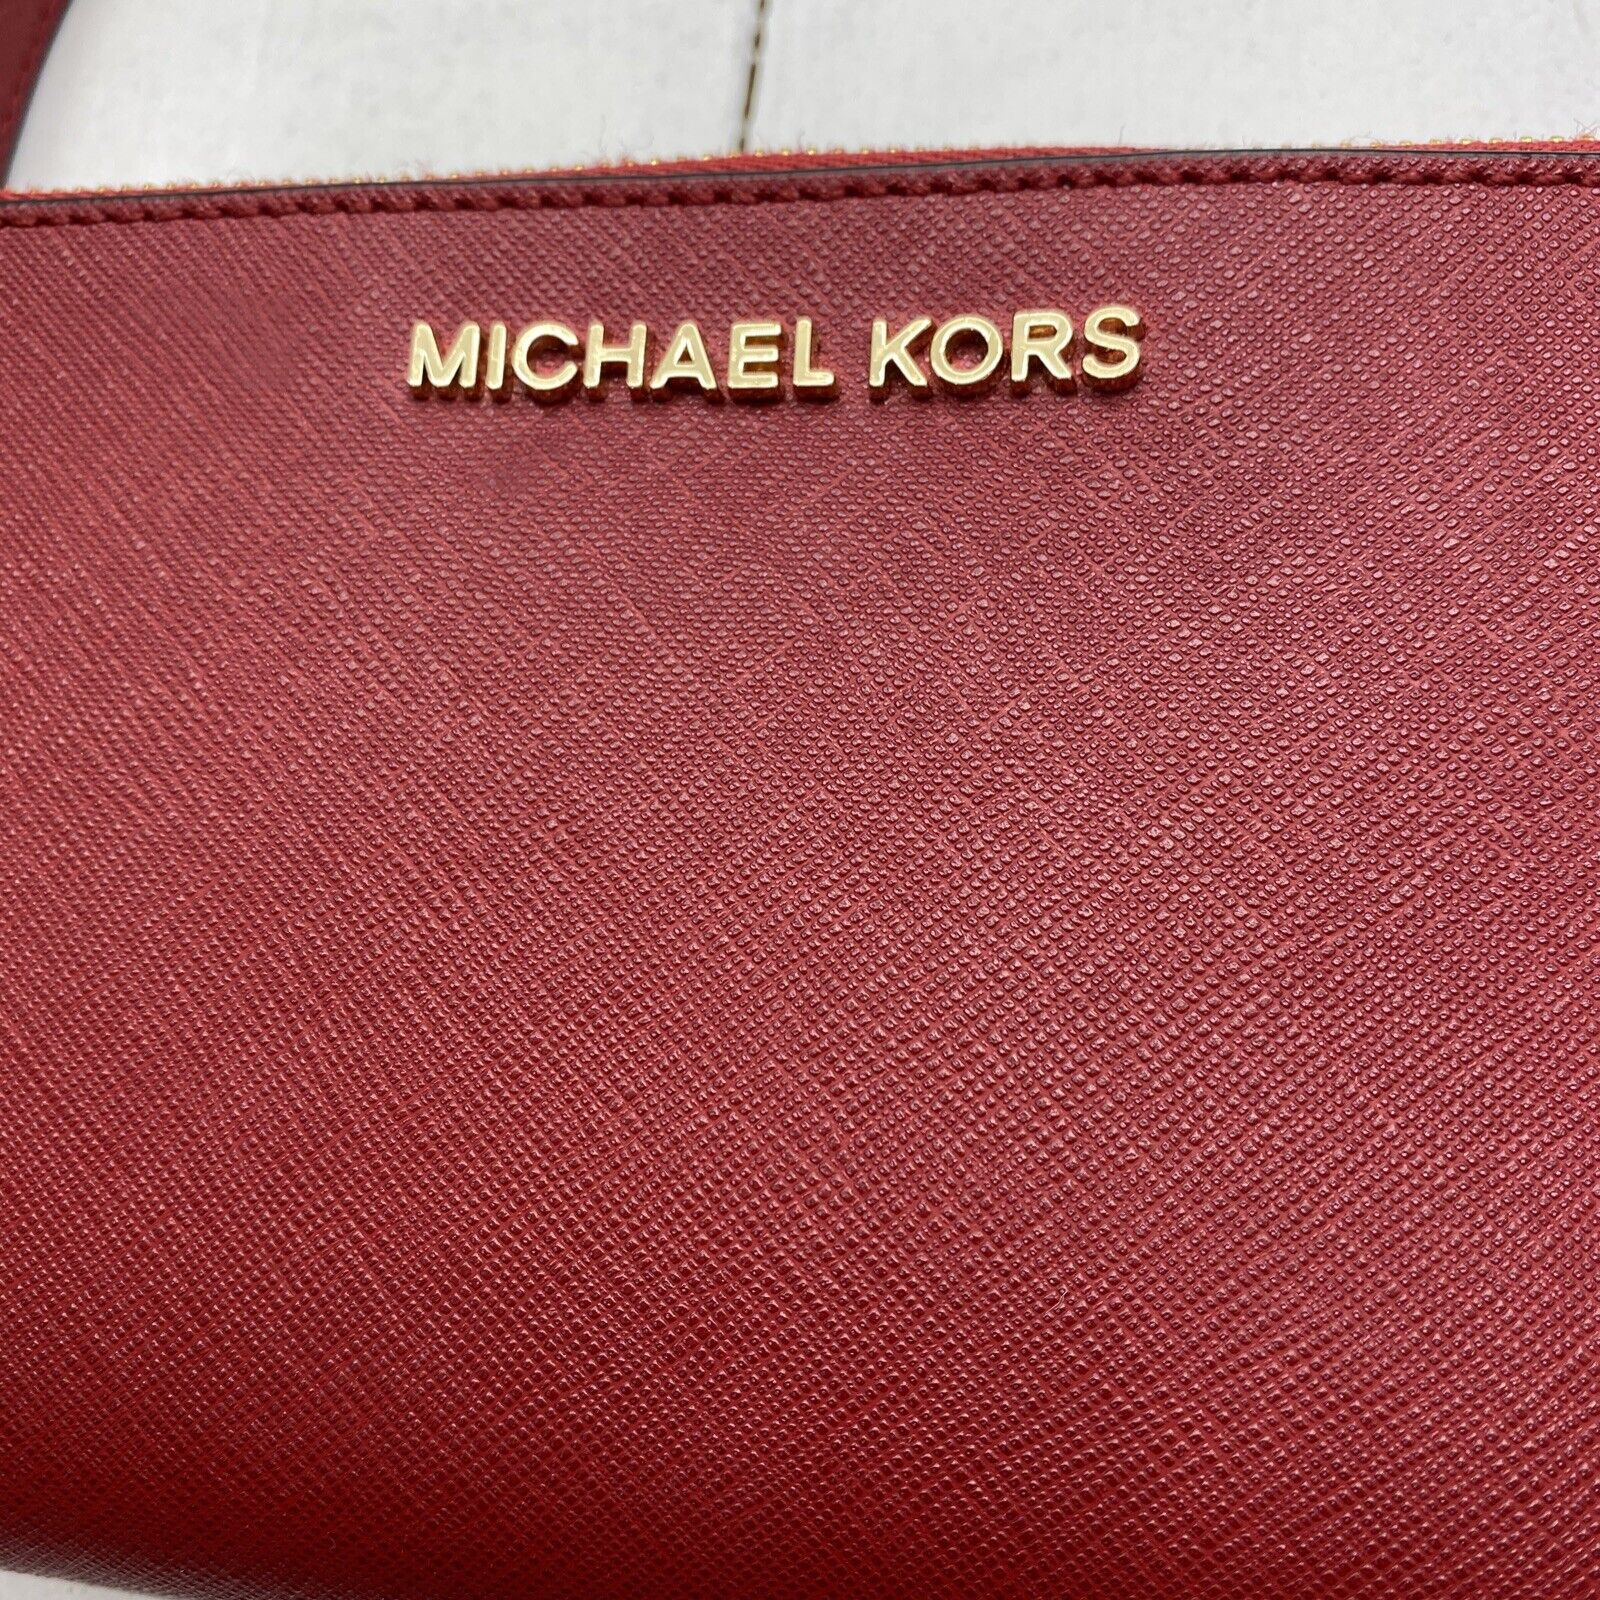 Michael Kors Outlet: Michael Jet wallet set in textured leather - Red